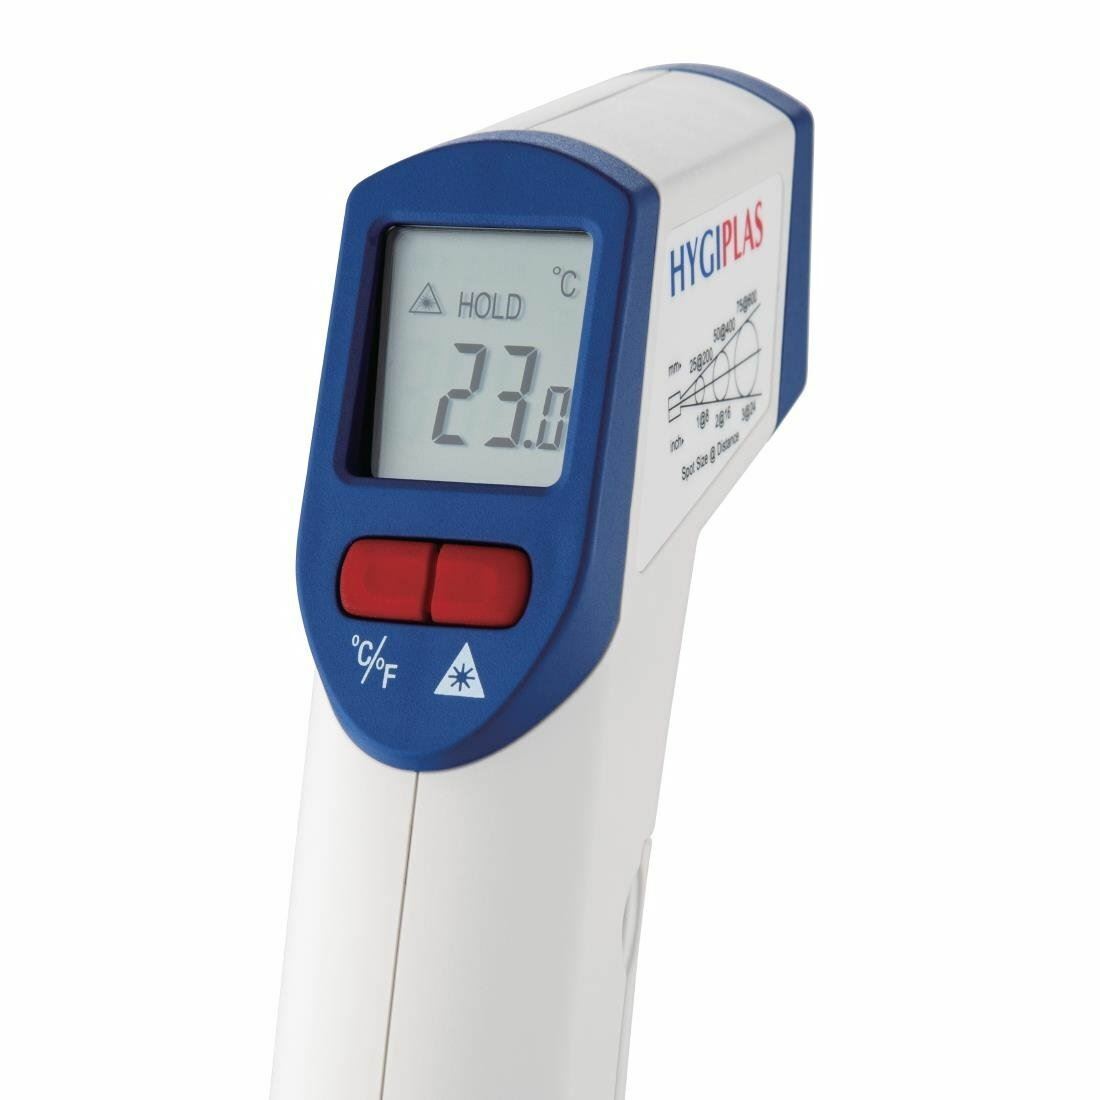 Hygiplas Mini Infrared Thermometer with Case